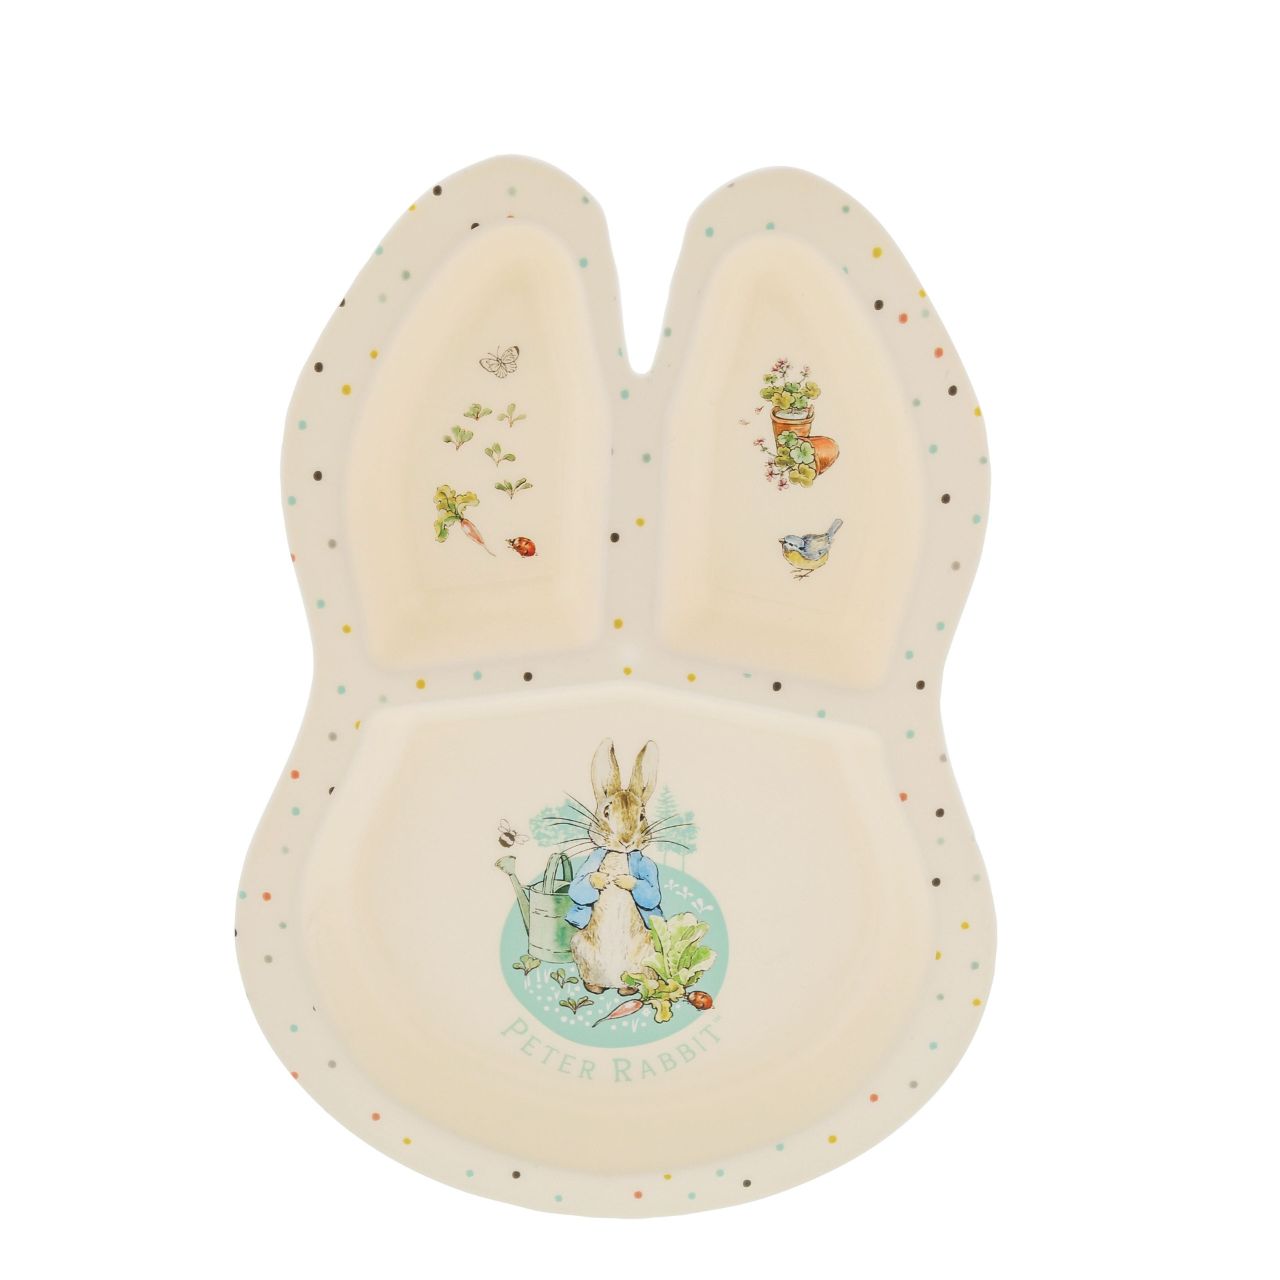 Peter Rabbit Plate  Introducing this brand new at home with Peter Rabbit collection. There's nothing quite like a fun Peter Rabbit motif to entice those little tummies to clear their plates. Make mealtimes fun and practical with this plate. Highly durable and can be used at home, in the garden, or on the go.